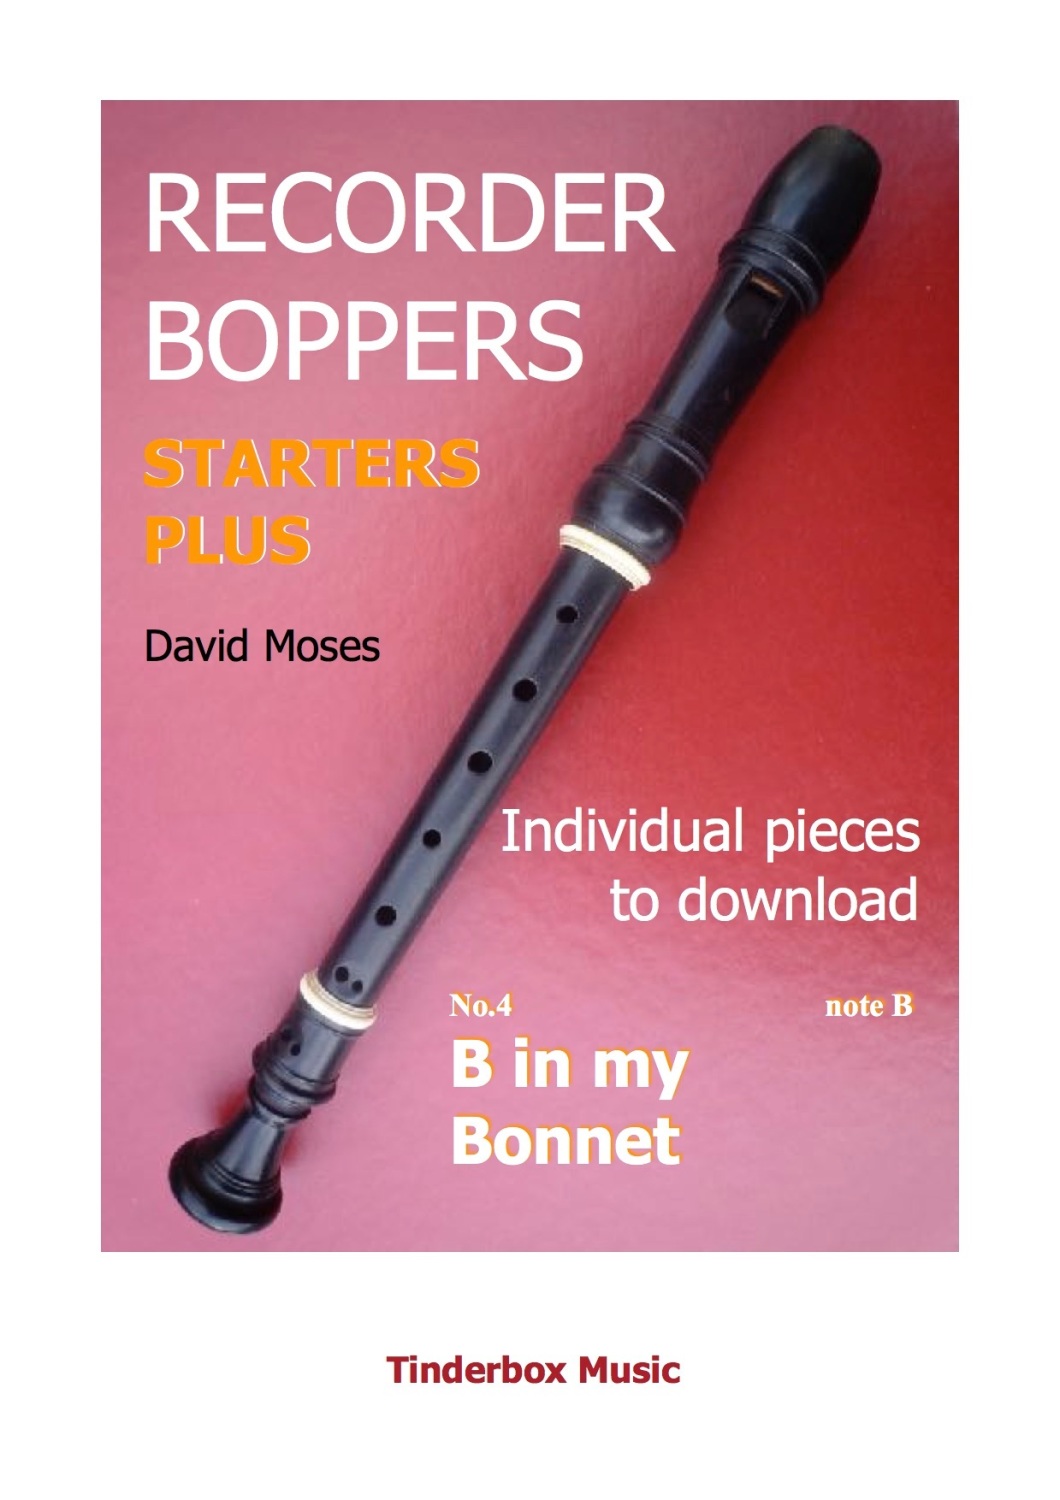 STARTERS PLUS individual pieces no.4  B IN MY BONNET  download